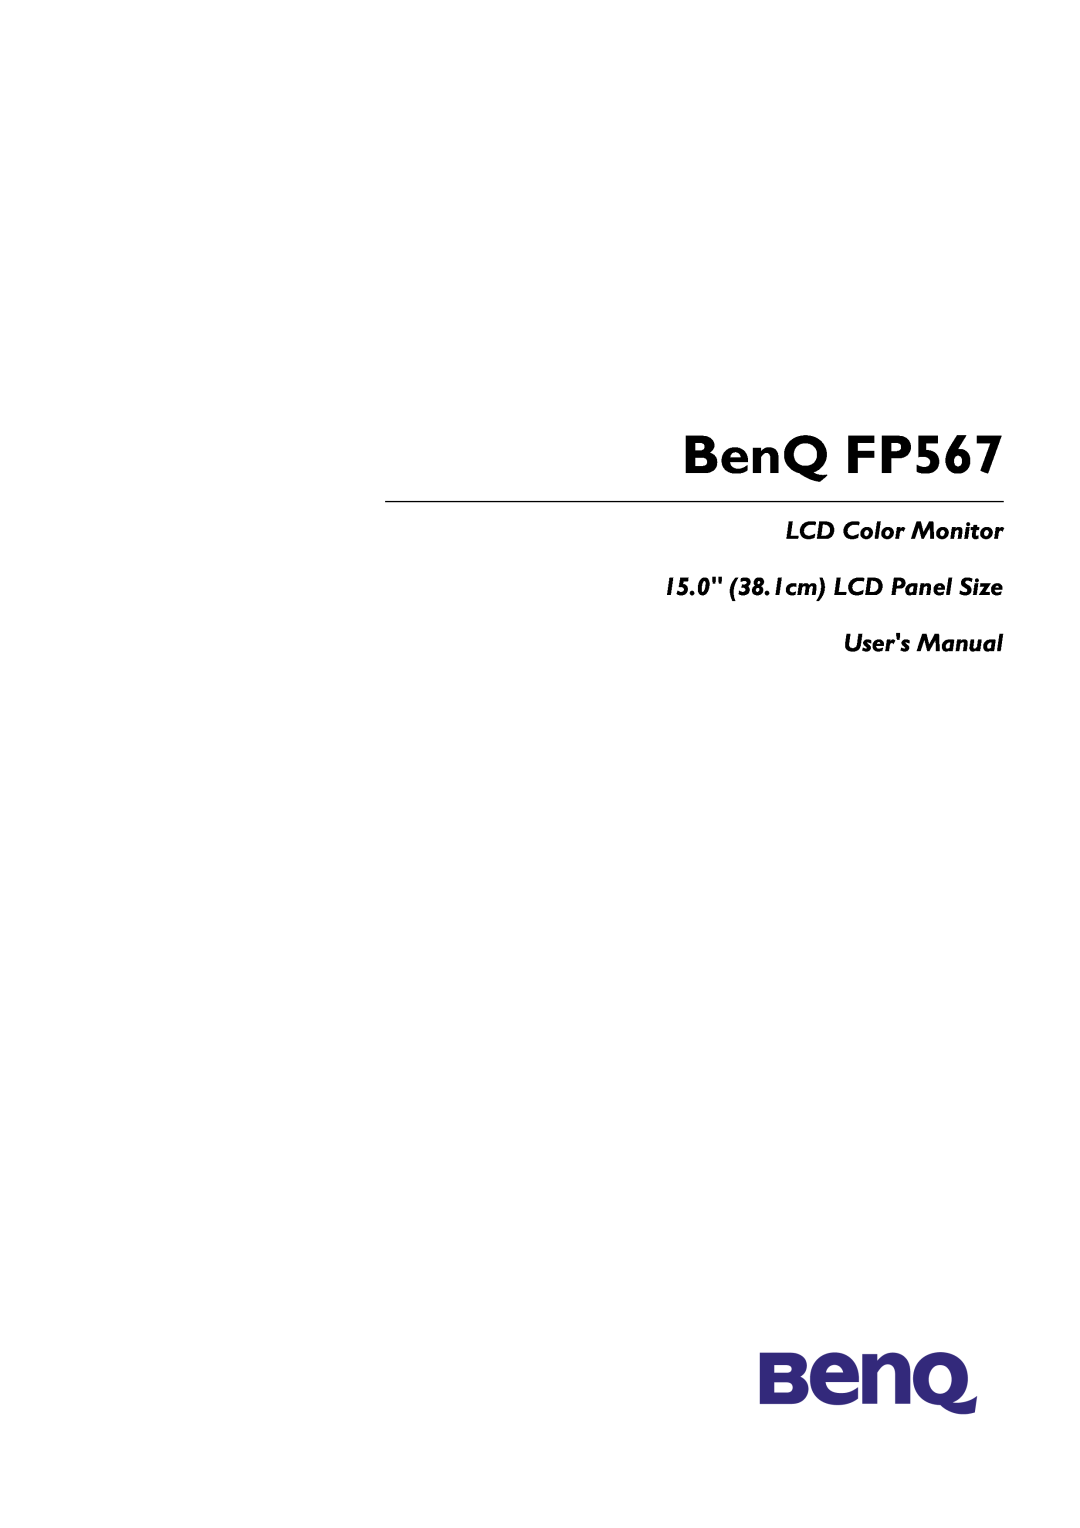 BenQ user manual BenQ FP567, LCD Color Monitor 15.0 38.1cm LCD Panel Size Users Manual 